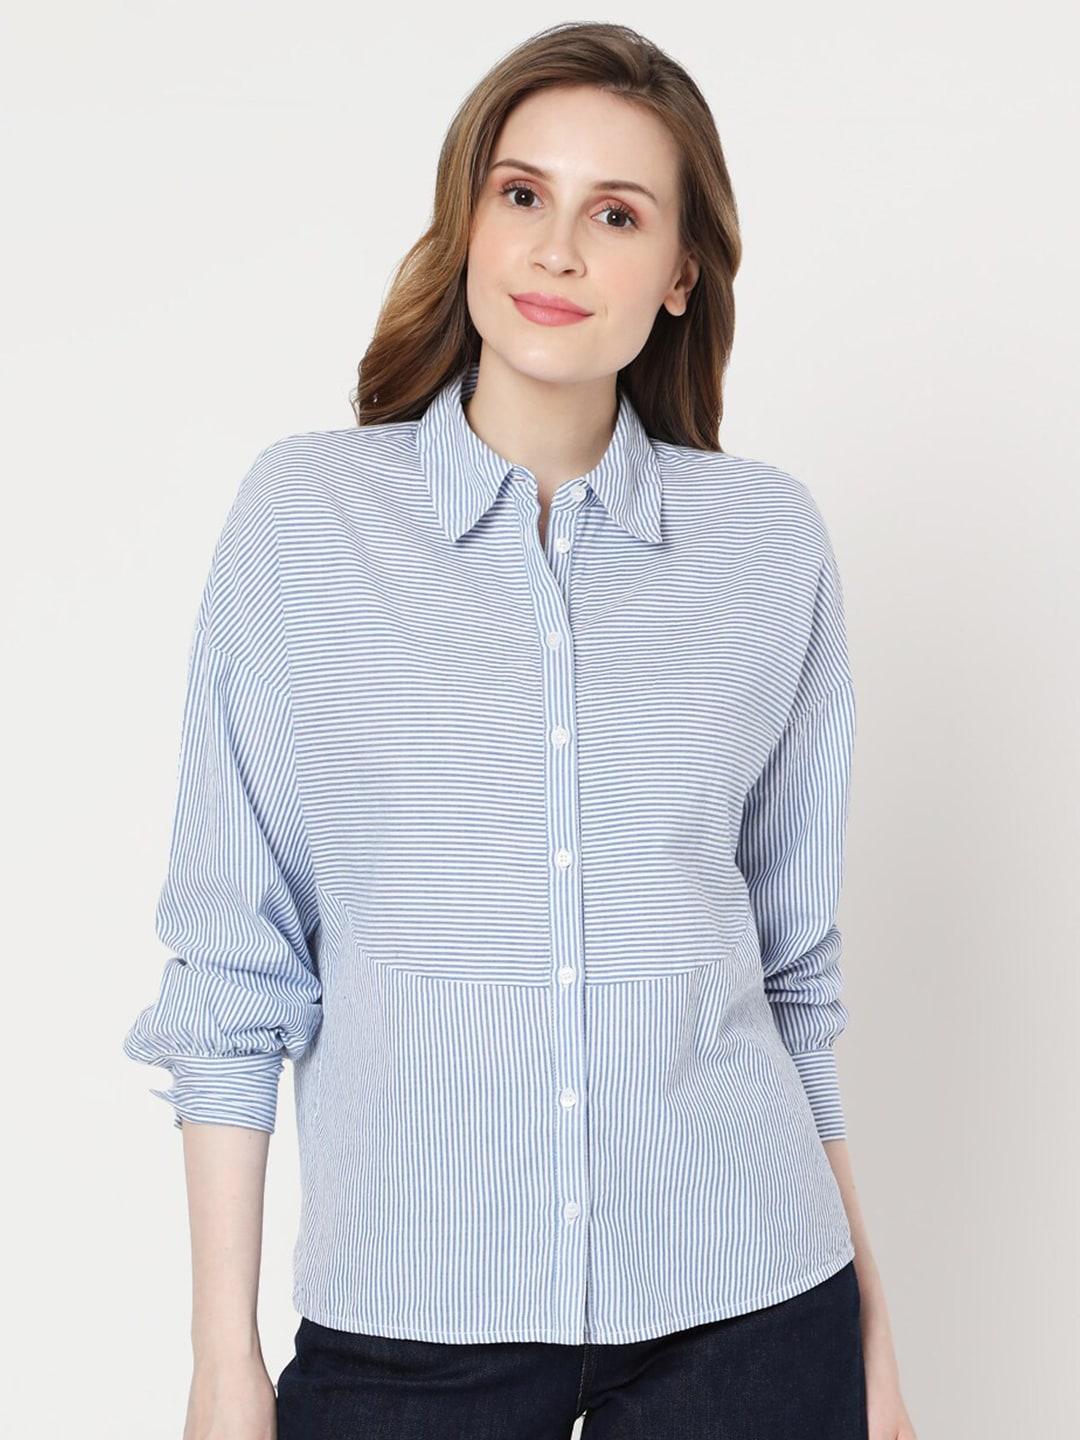 vero-moda-blue-striped-extended-sleeves-shirt-style-top